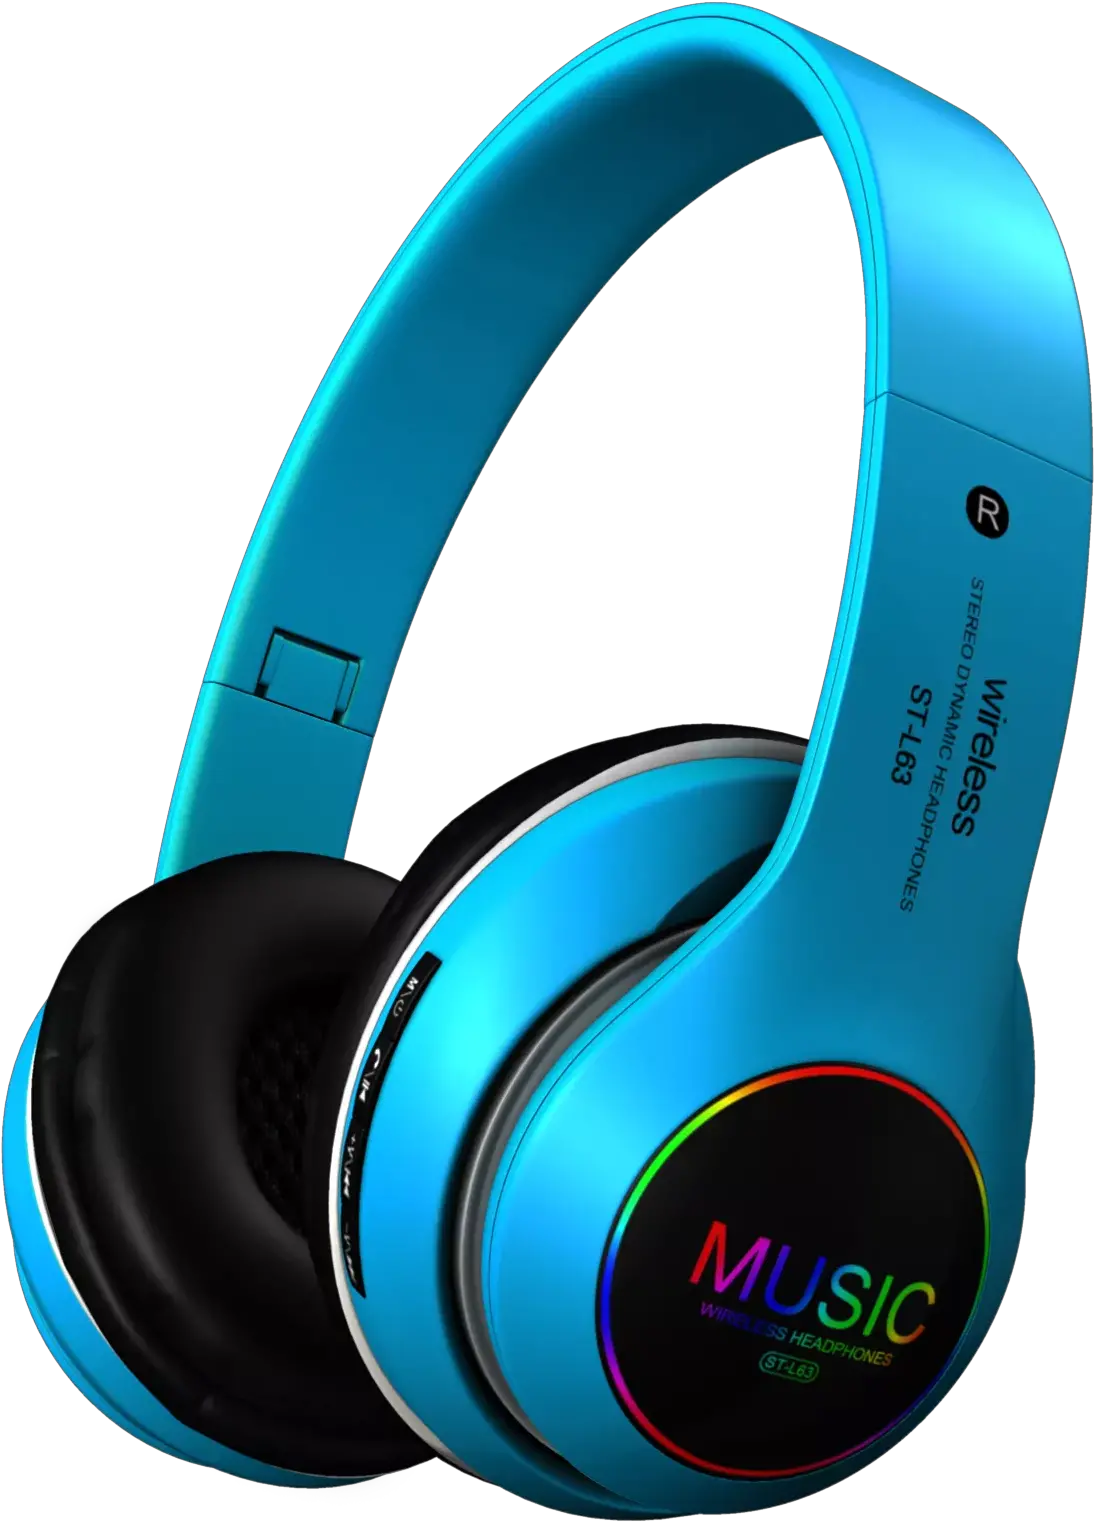 Oem Wholesale St L63 Blue Verified Supplier Free Sample St L 63 Headphones Png Tf Card Icon